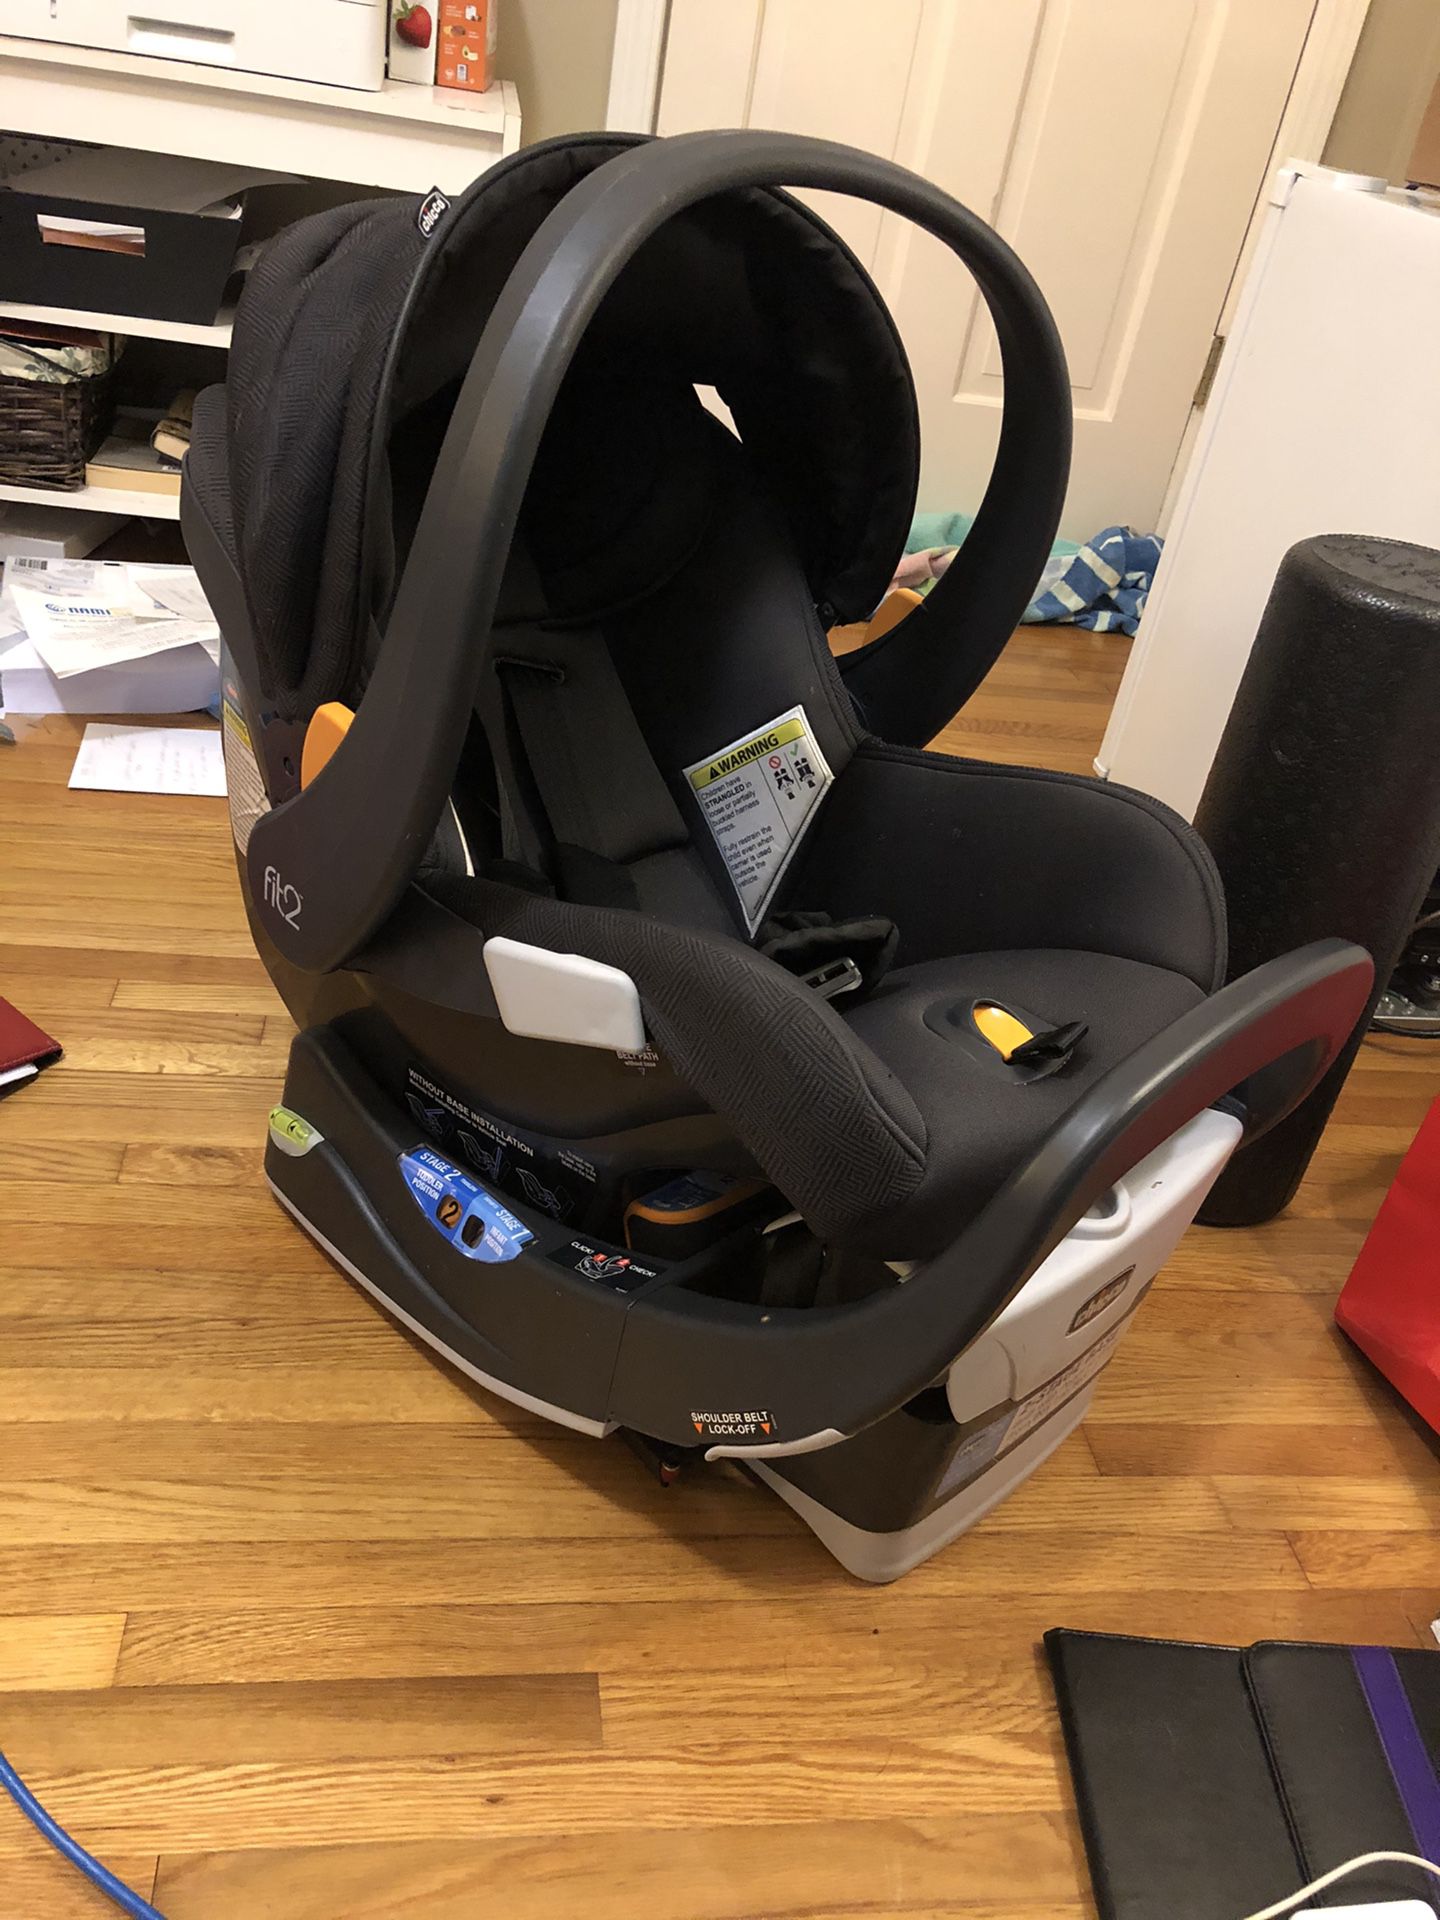 Newborn- 2 years old Fit2 car seat and 2 car base attachment